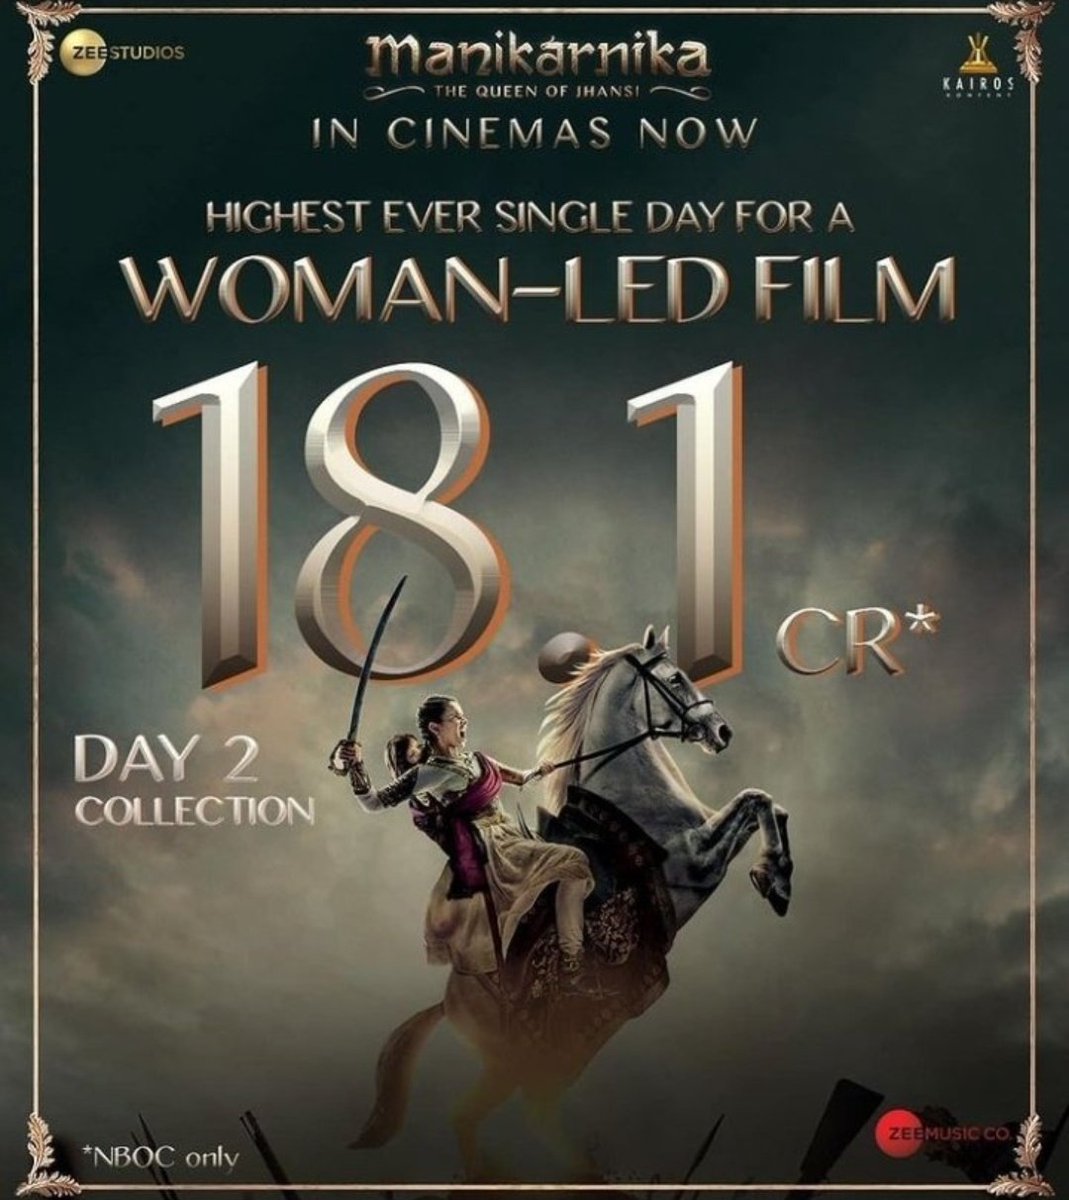 All the #Aliabhat and #DeepikaPadukone fans first tell your favorite to break this record in women lead film than bark